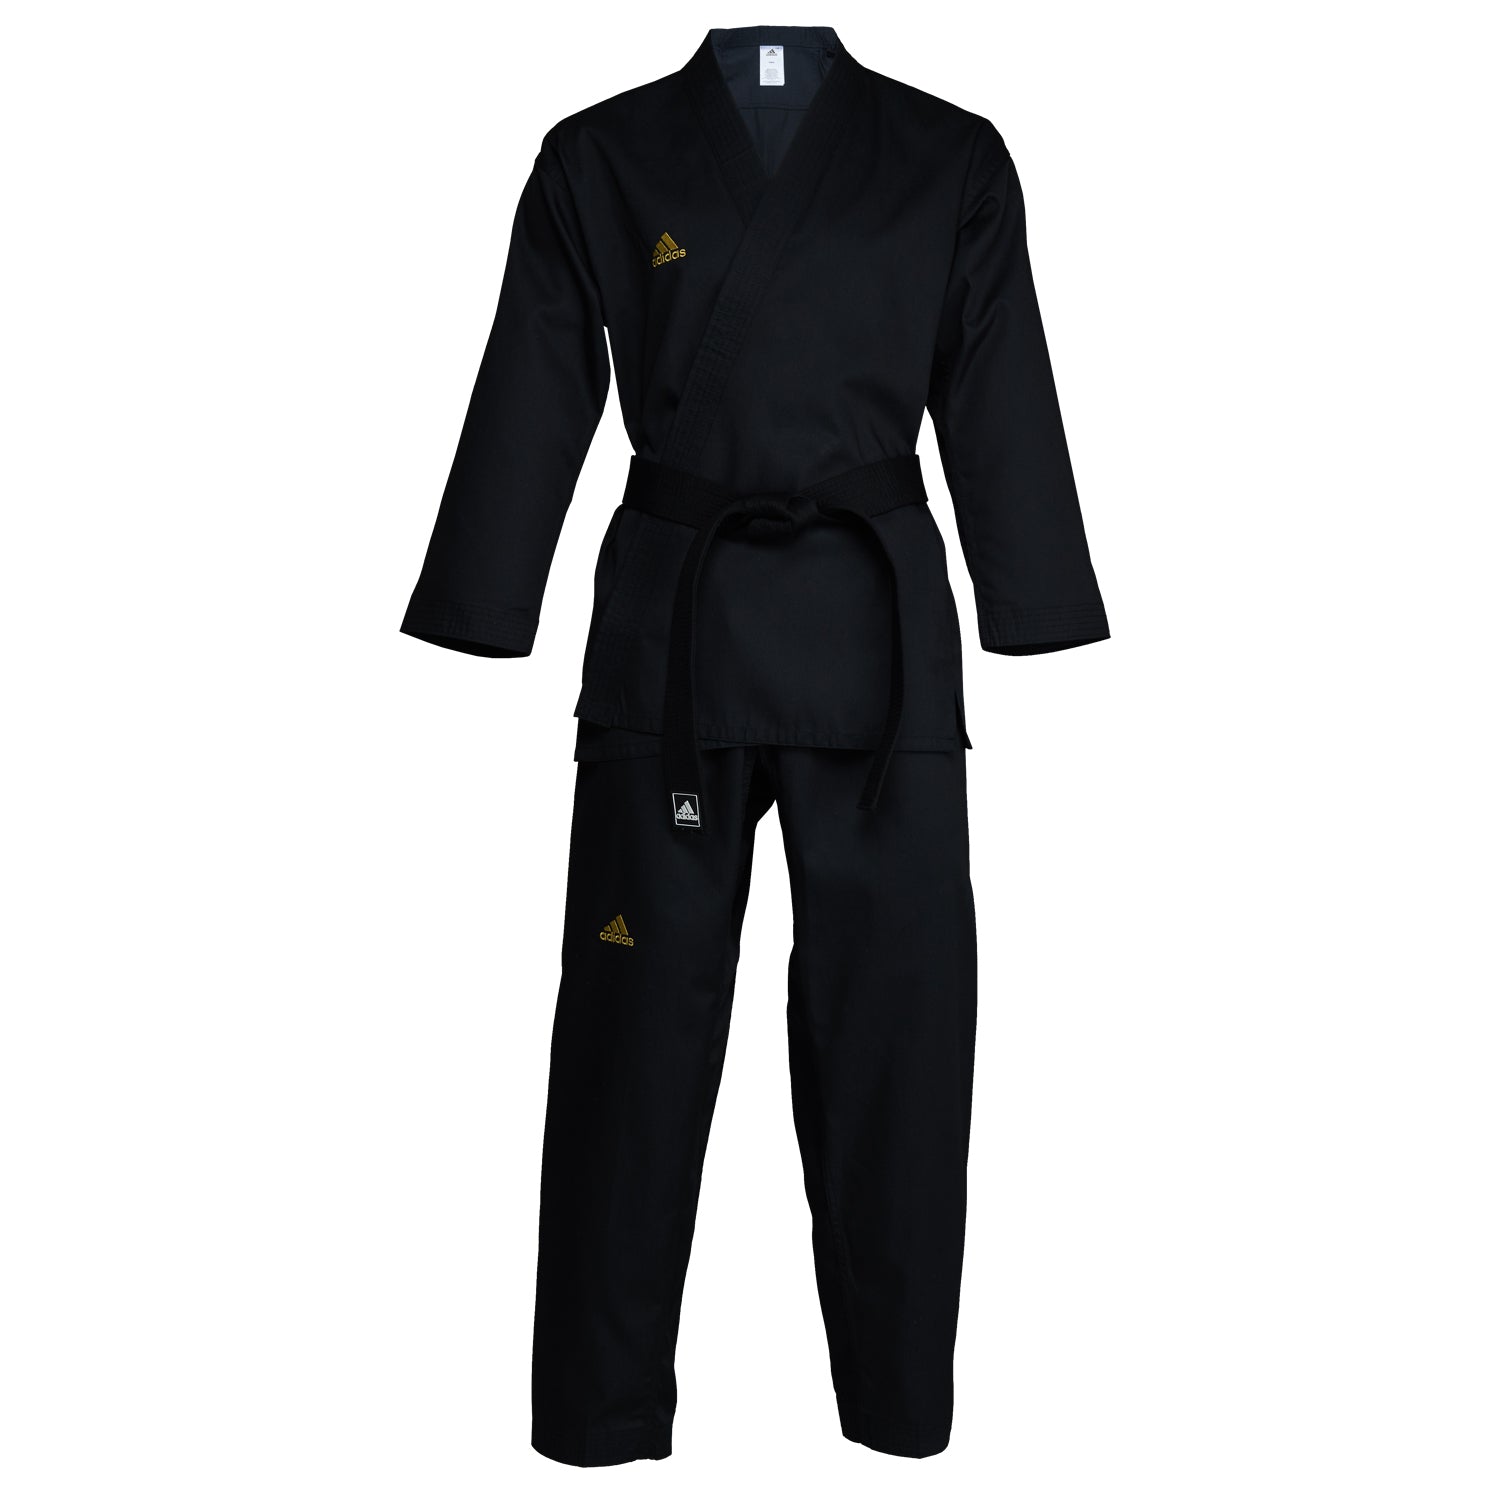 ADIDAS OPEN KARATE – All American Martial Supply